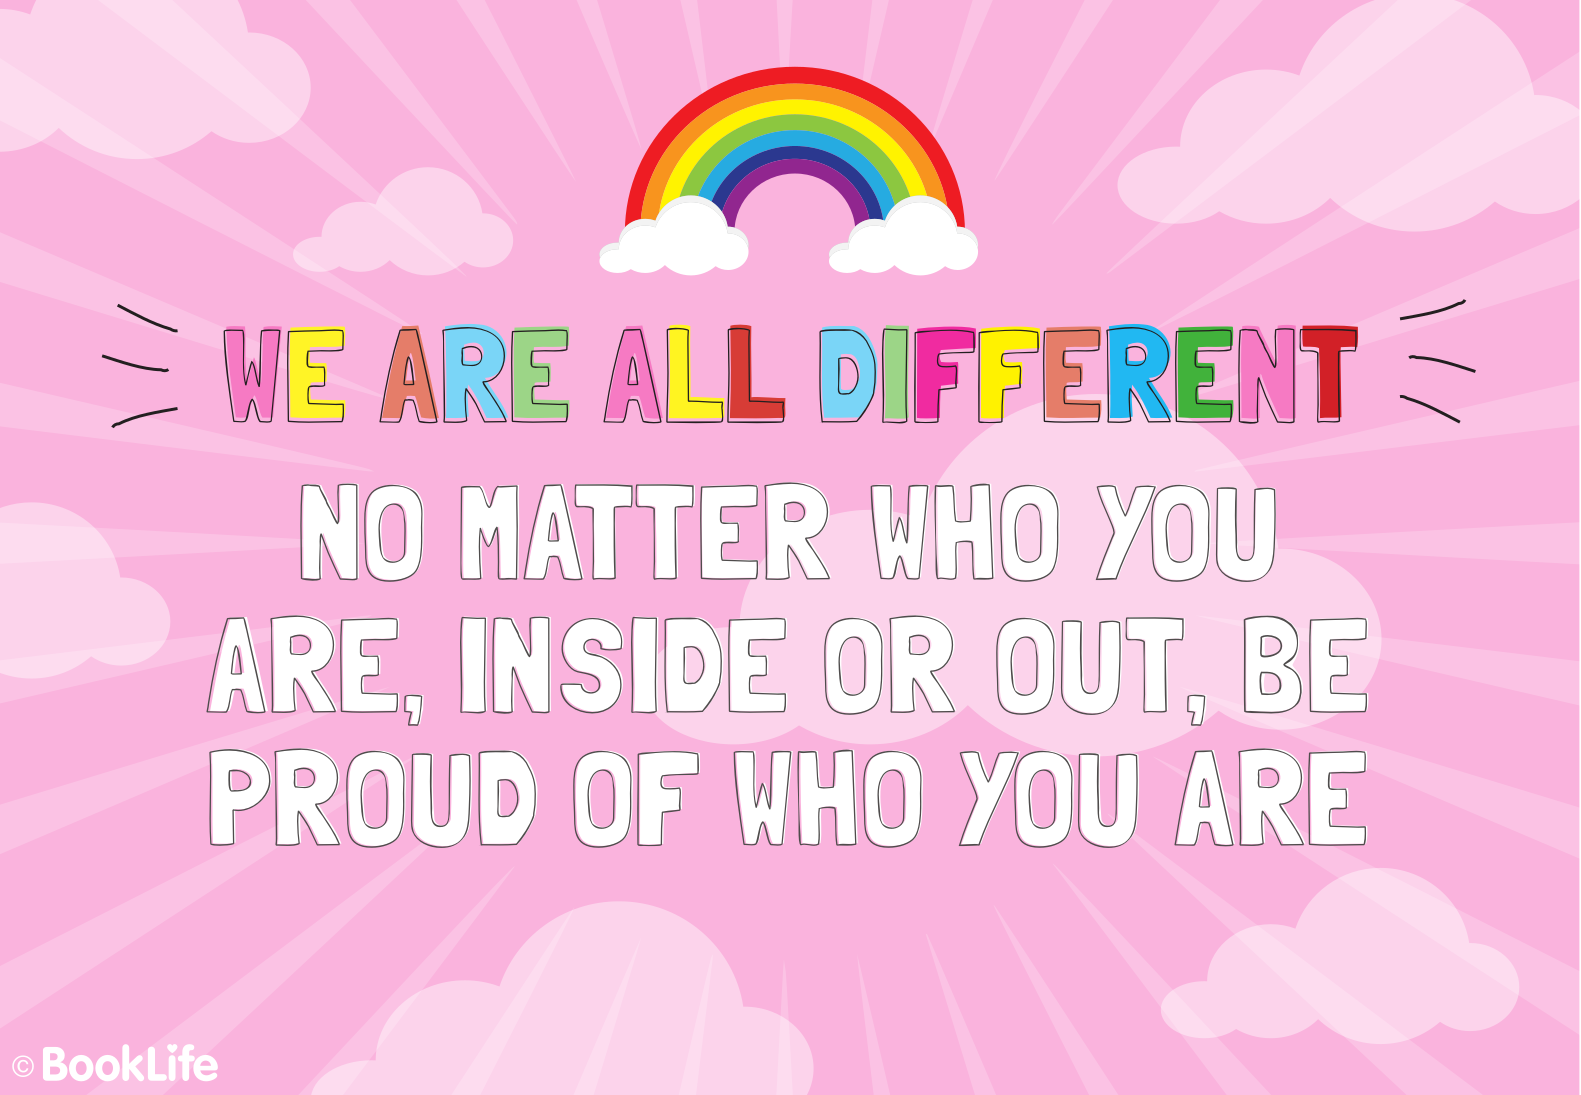 We Are All Different Poster by BookLife, Pride poster, be proud, pride month